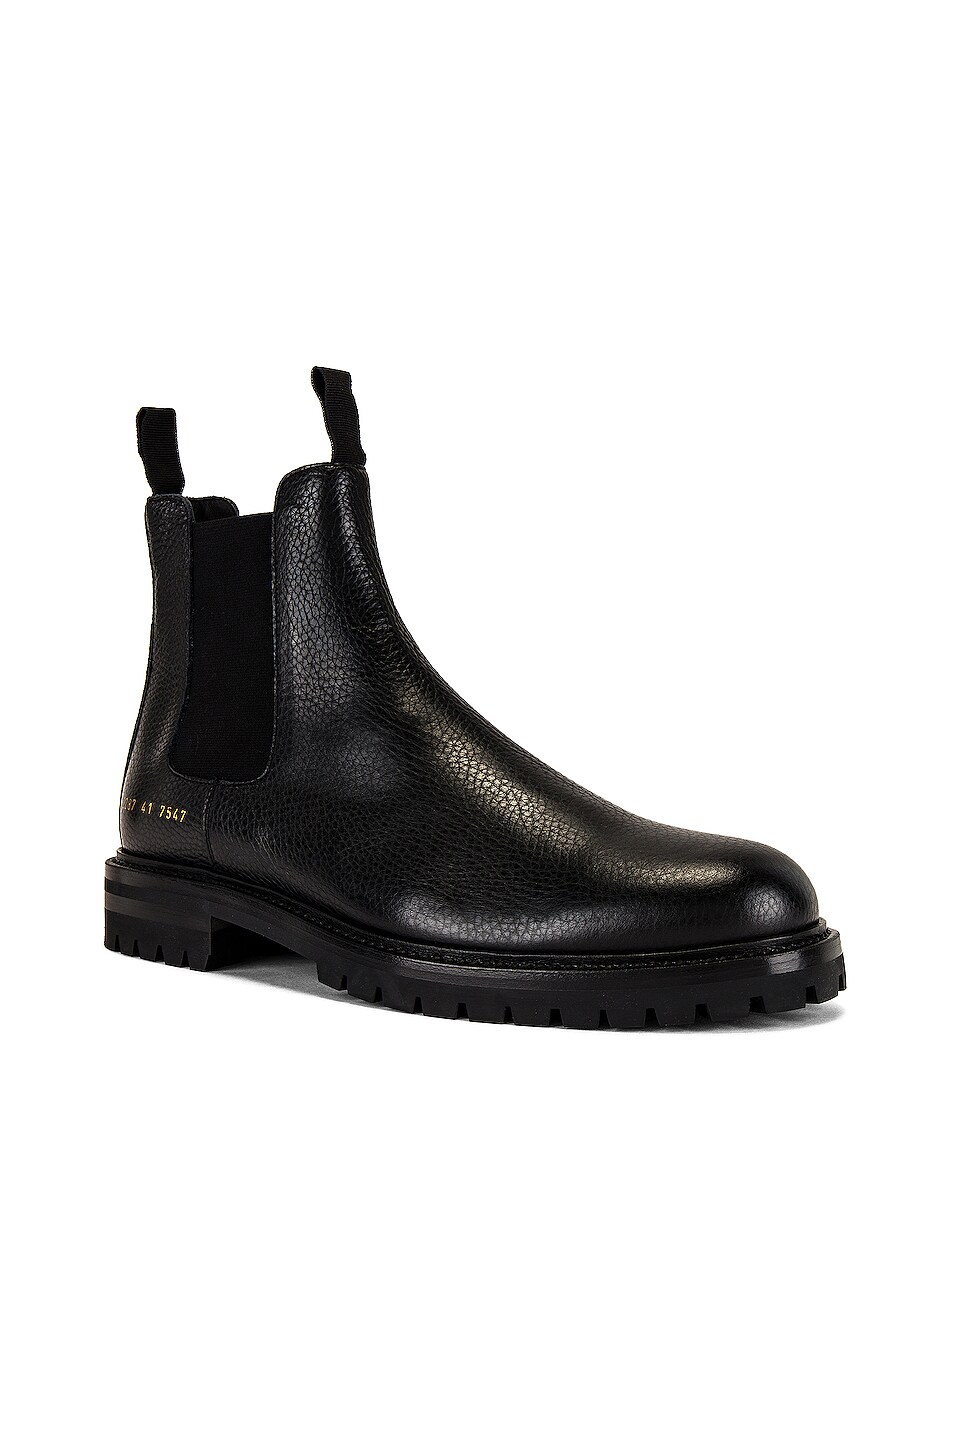 Image 1 of Common Projects Winter Chelsea Bumpy Boot in Black